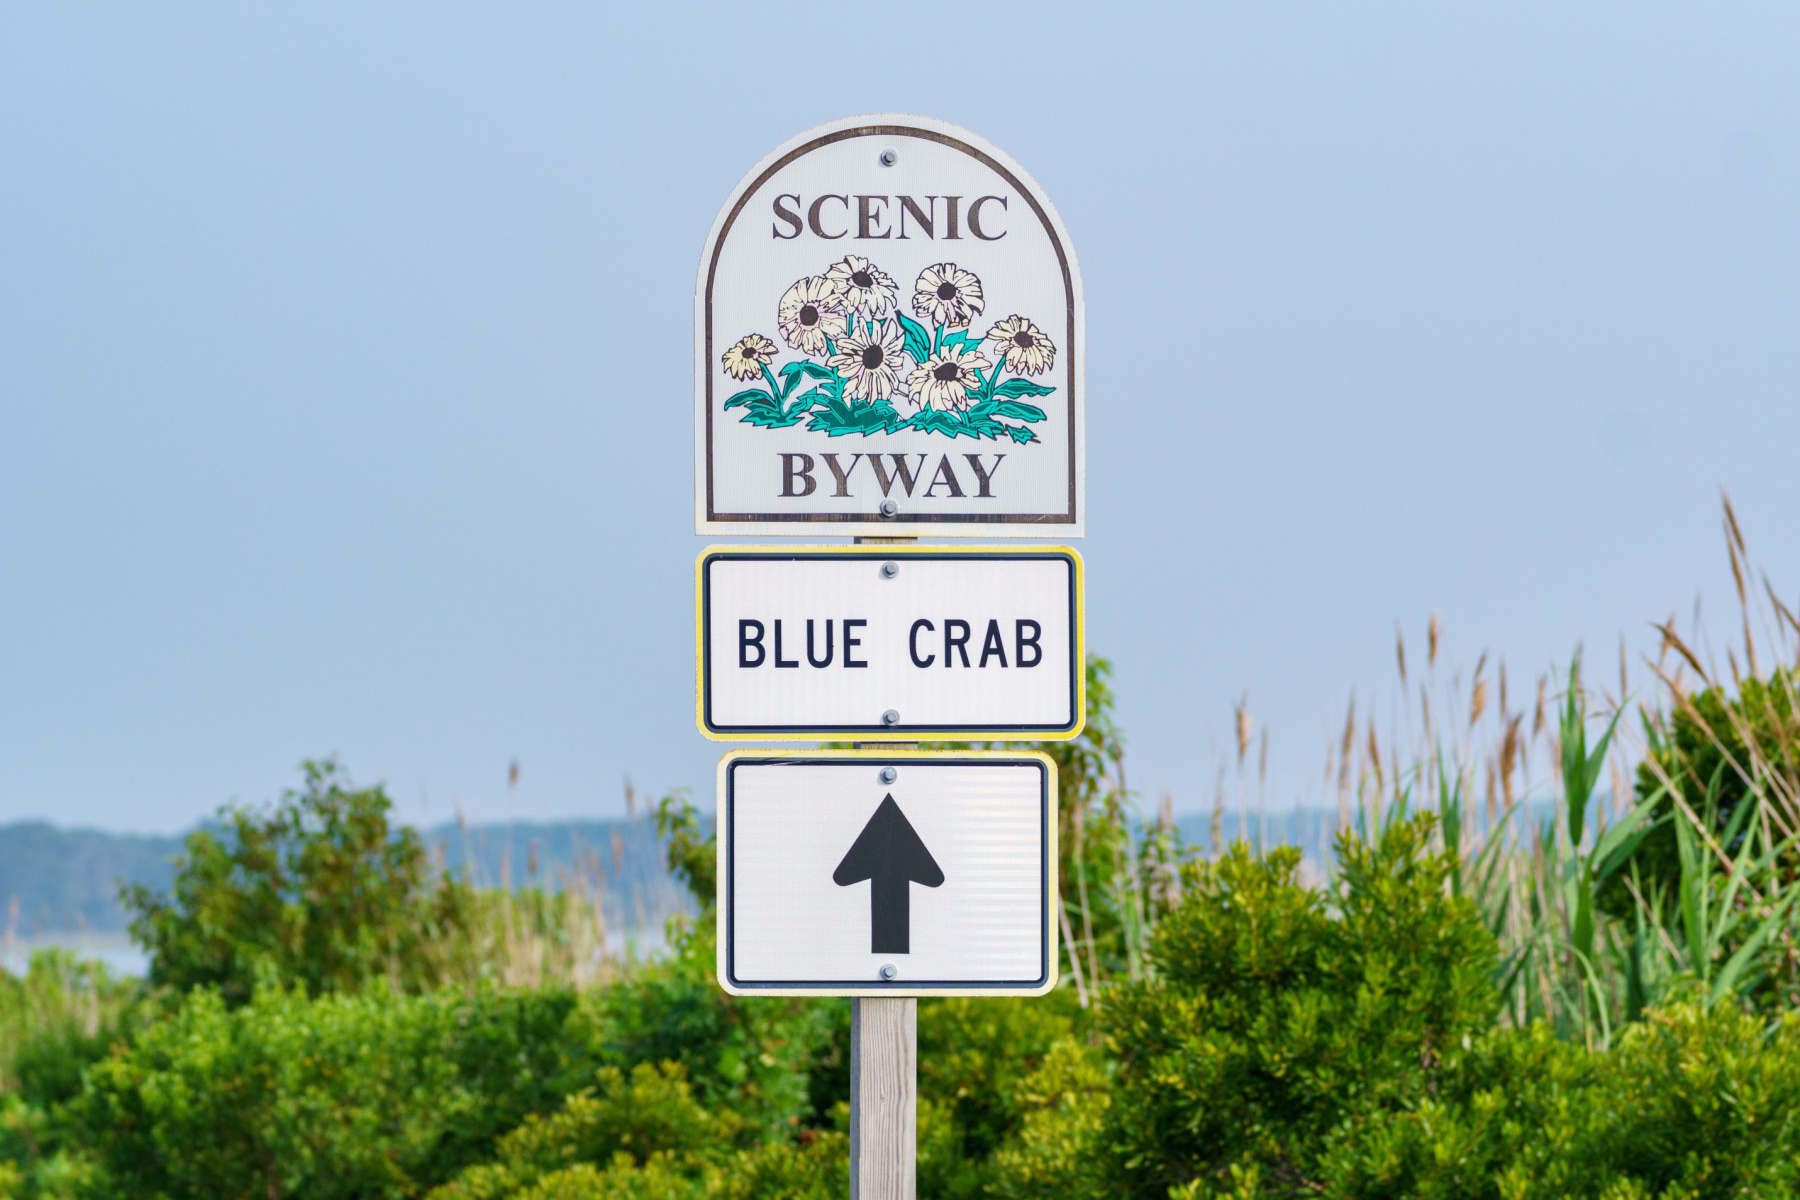 <p>In “Tidewater Maryland,” the Chesapeake Country <a href="https://bluecrabbyway.org/" title="https://bluecrabbyway.org/">Blue Crab Byway</a> takes you on a 210-mile journey from the Nanticoke River toward the urban center of the region, Salisbury. Located between Chesapeake Bay and the Atlantic Ocean, it lets you enjoy rivers, wetlands, marshes, coves, beaches, fresh-caught crab, abundant farmland, unique dialects and historical structures, including 200-year-old neoclassical Teackle Mansion.</p>